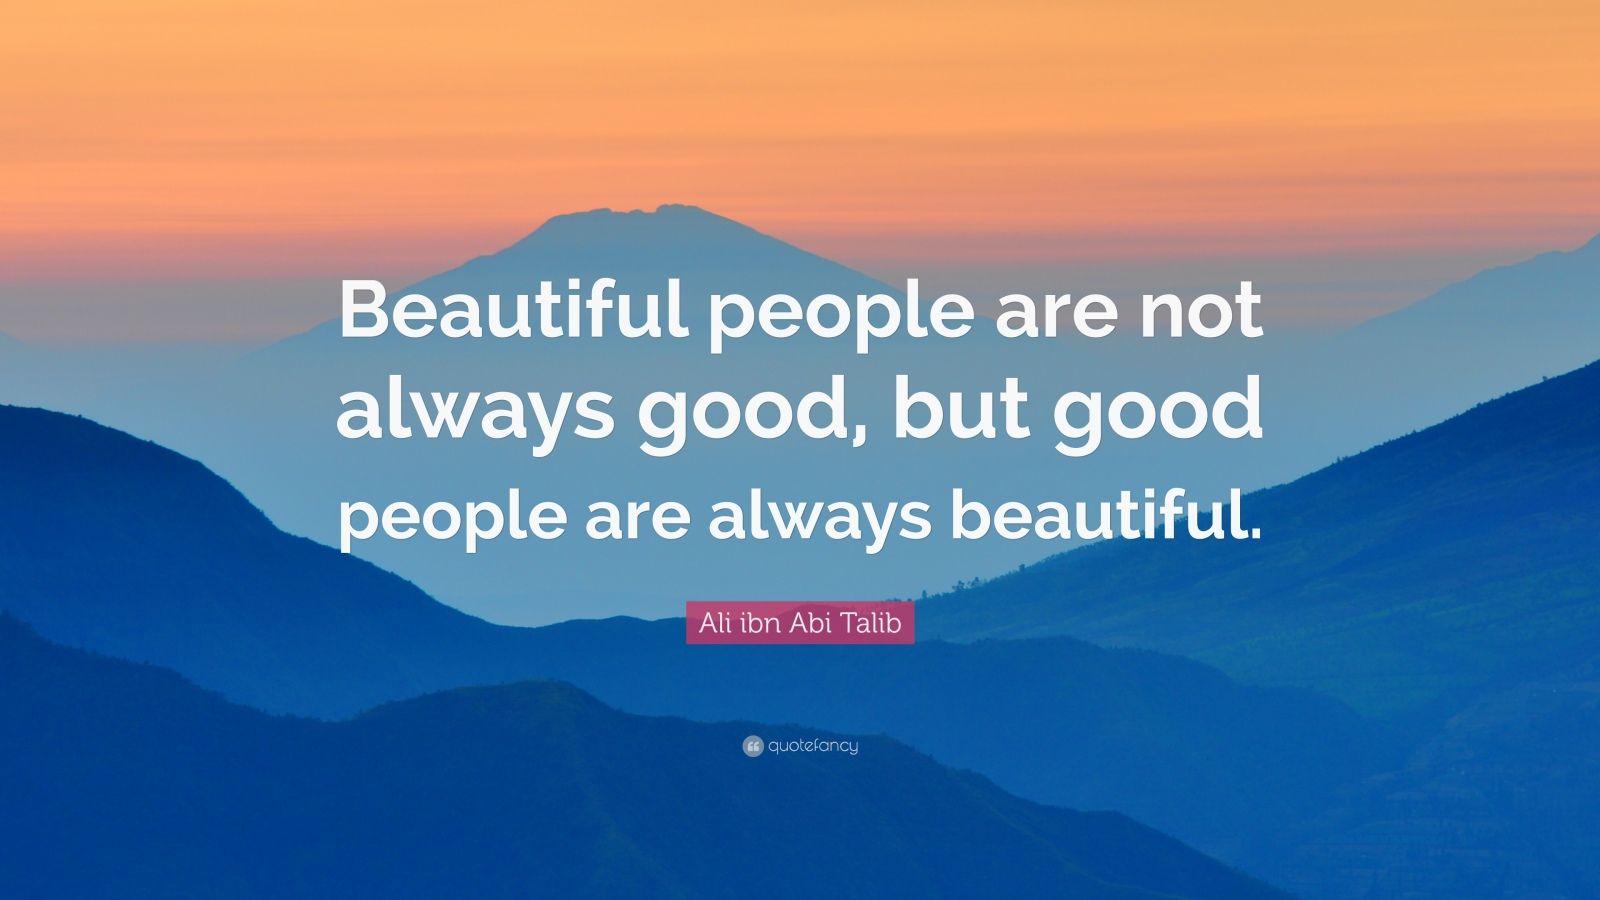 Ali ibn Abi Talib Quote: “Beautiful people are not always good, but